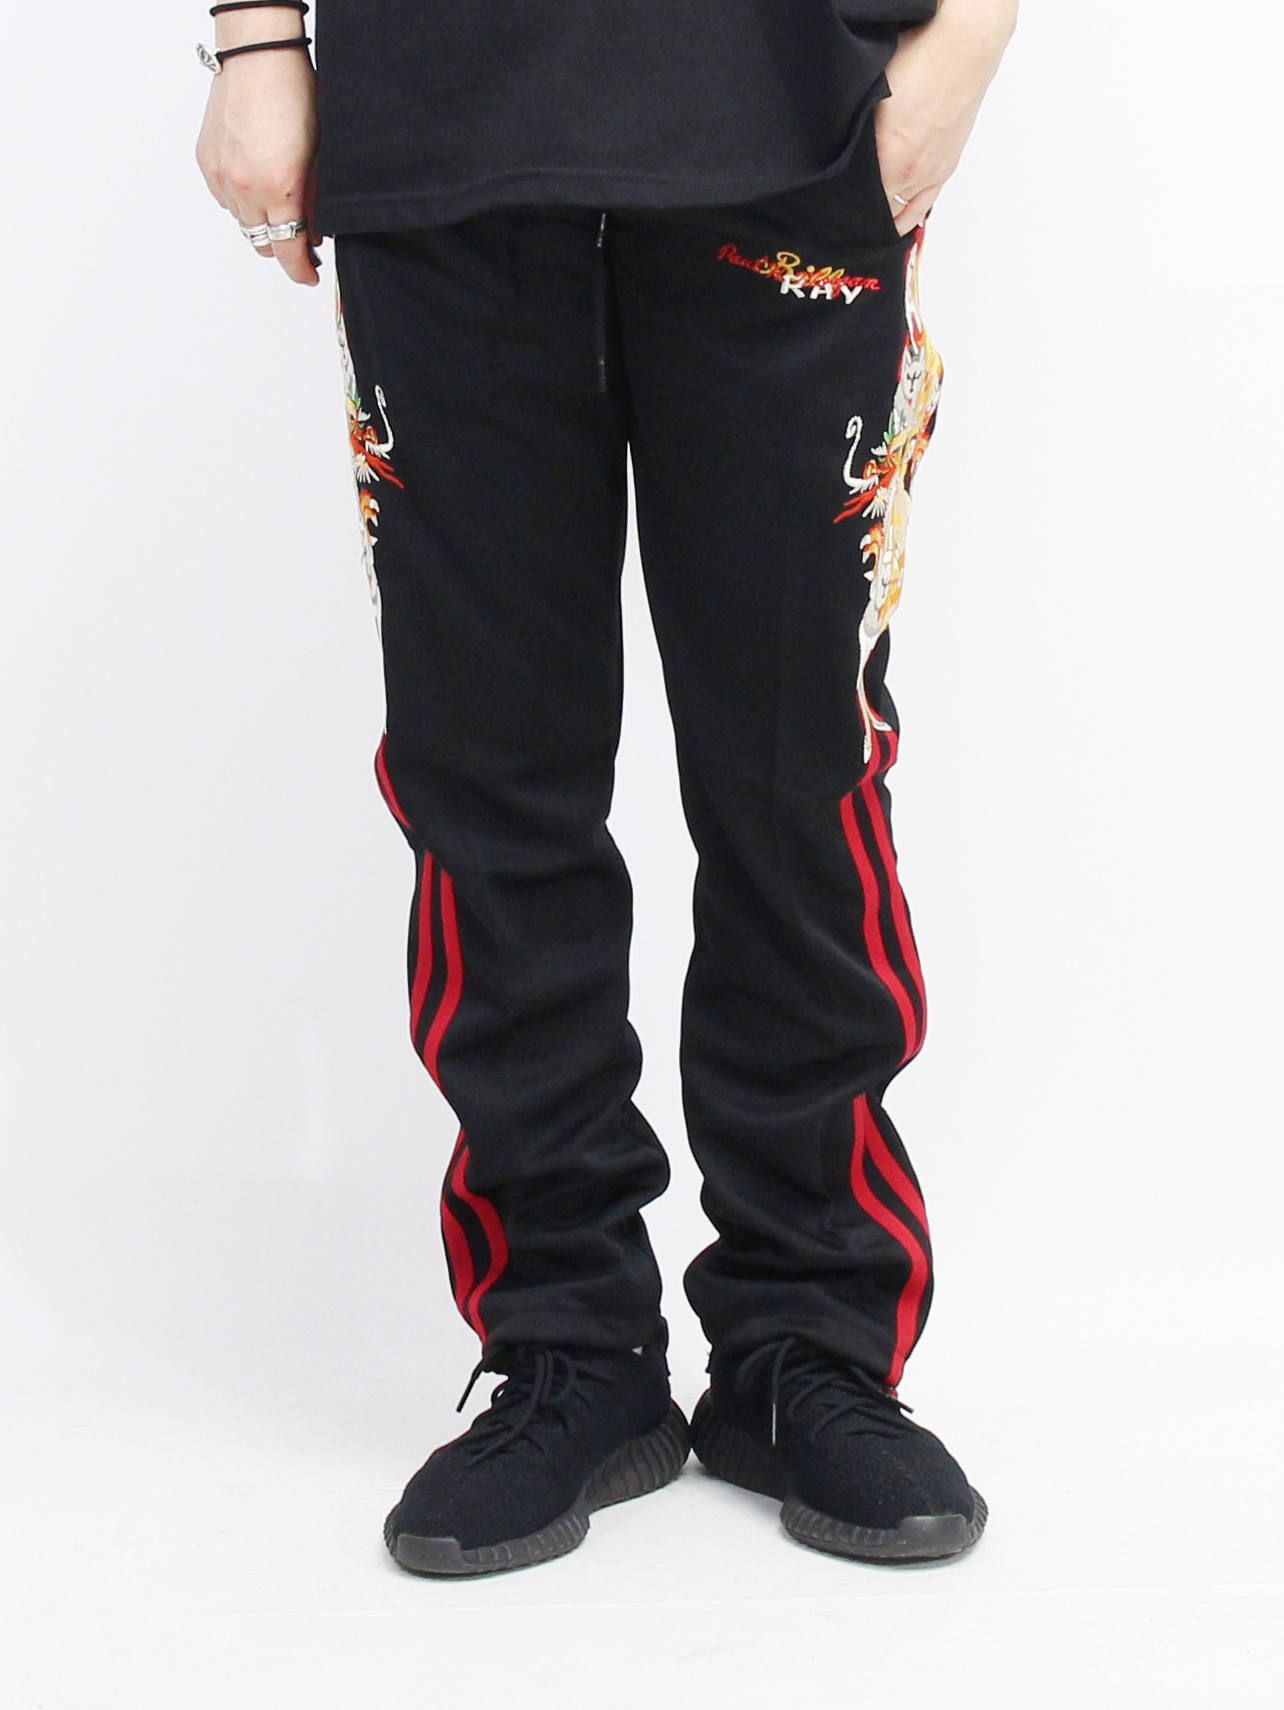 doublet - カオス刺繍ジャージーパンツ - CHAOS EMBROIDERY TRACK PANTS - BLACK | ADDICT WEB  SHOP